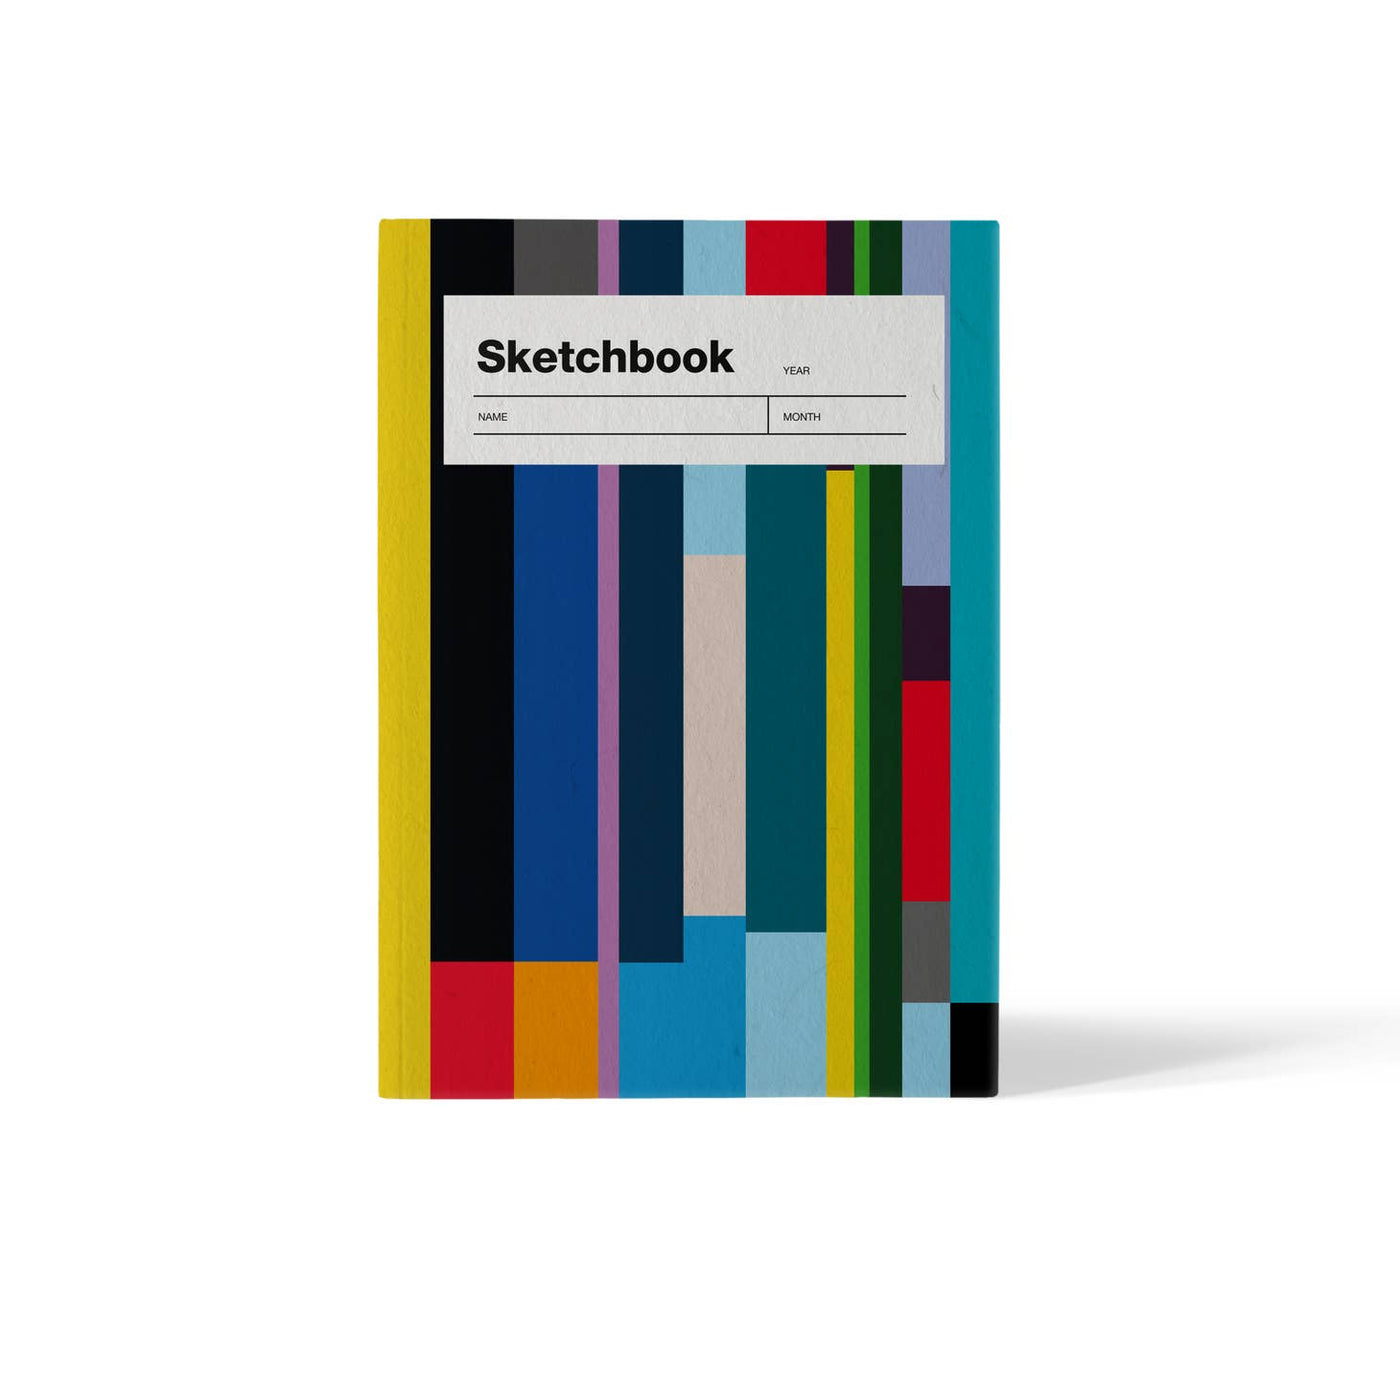 front cover of sketchbook with bars of bright colors in red, yellow, blue, purple, green and black; title of "sketchbook" sits at the top with spaces for year, name and month to be written